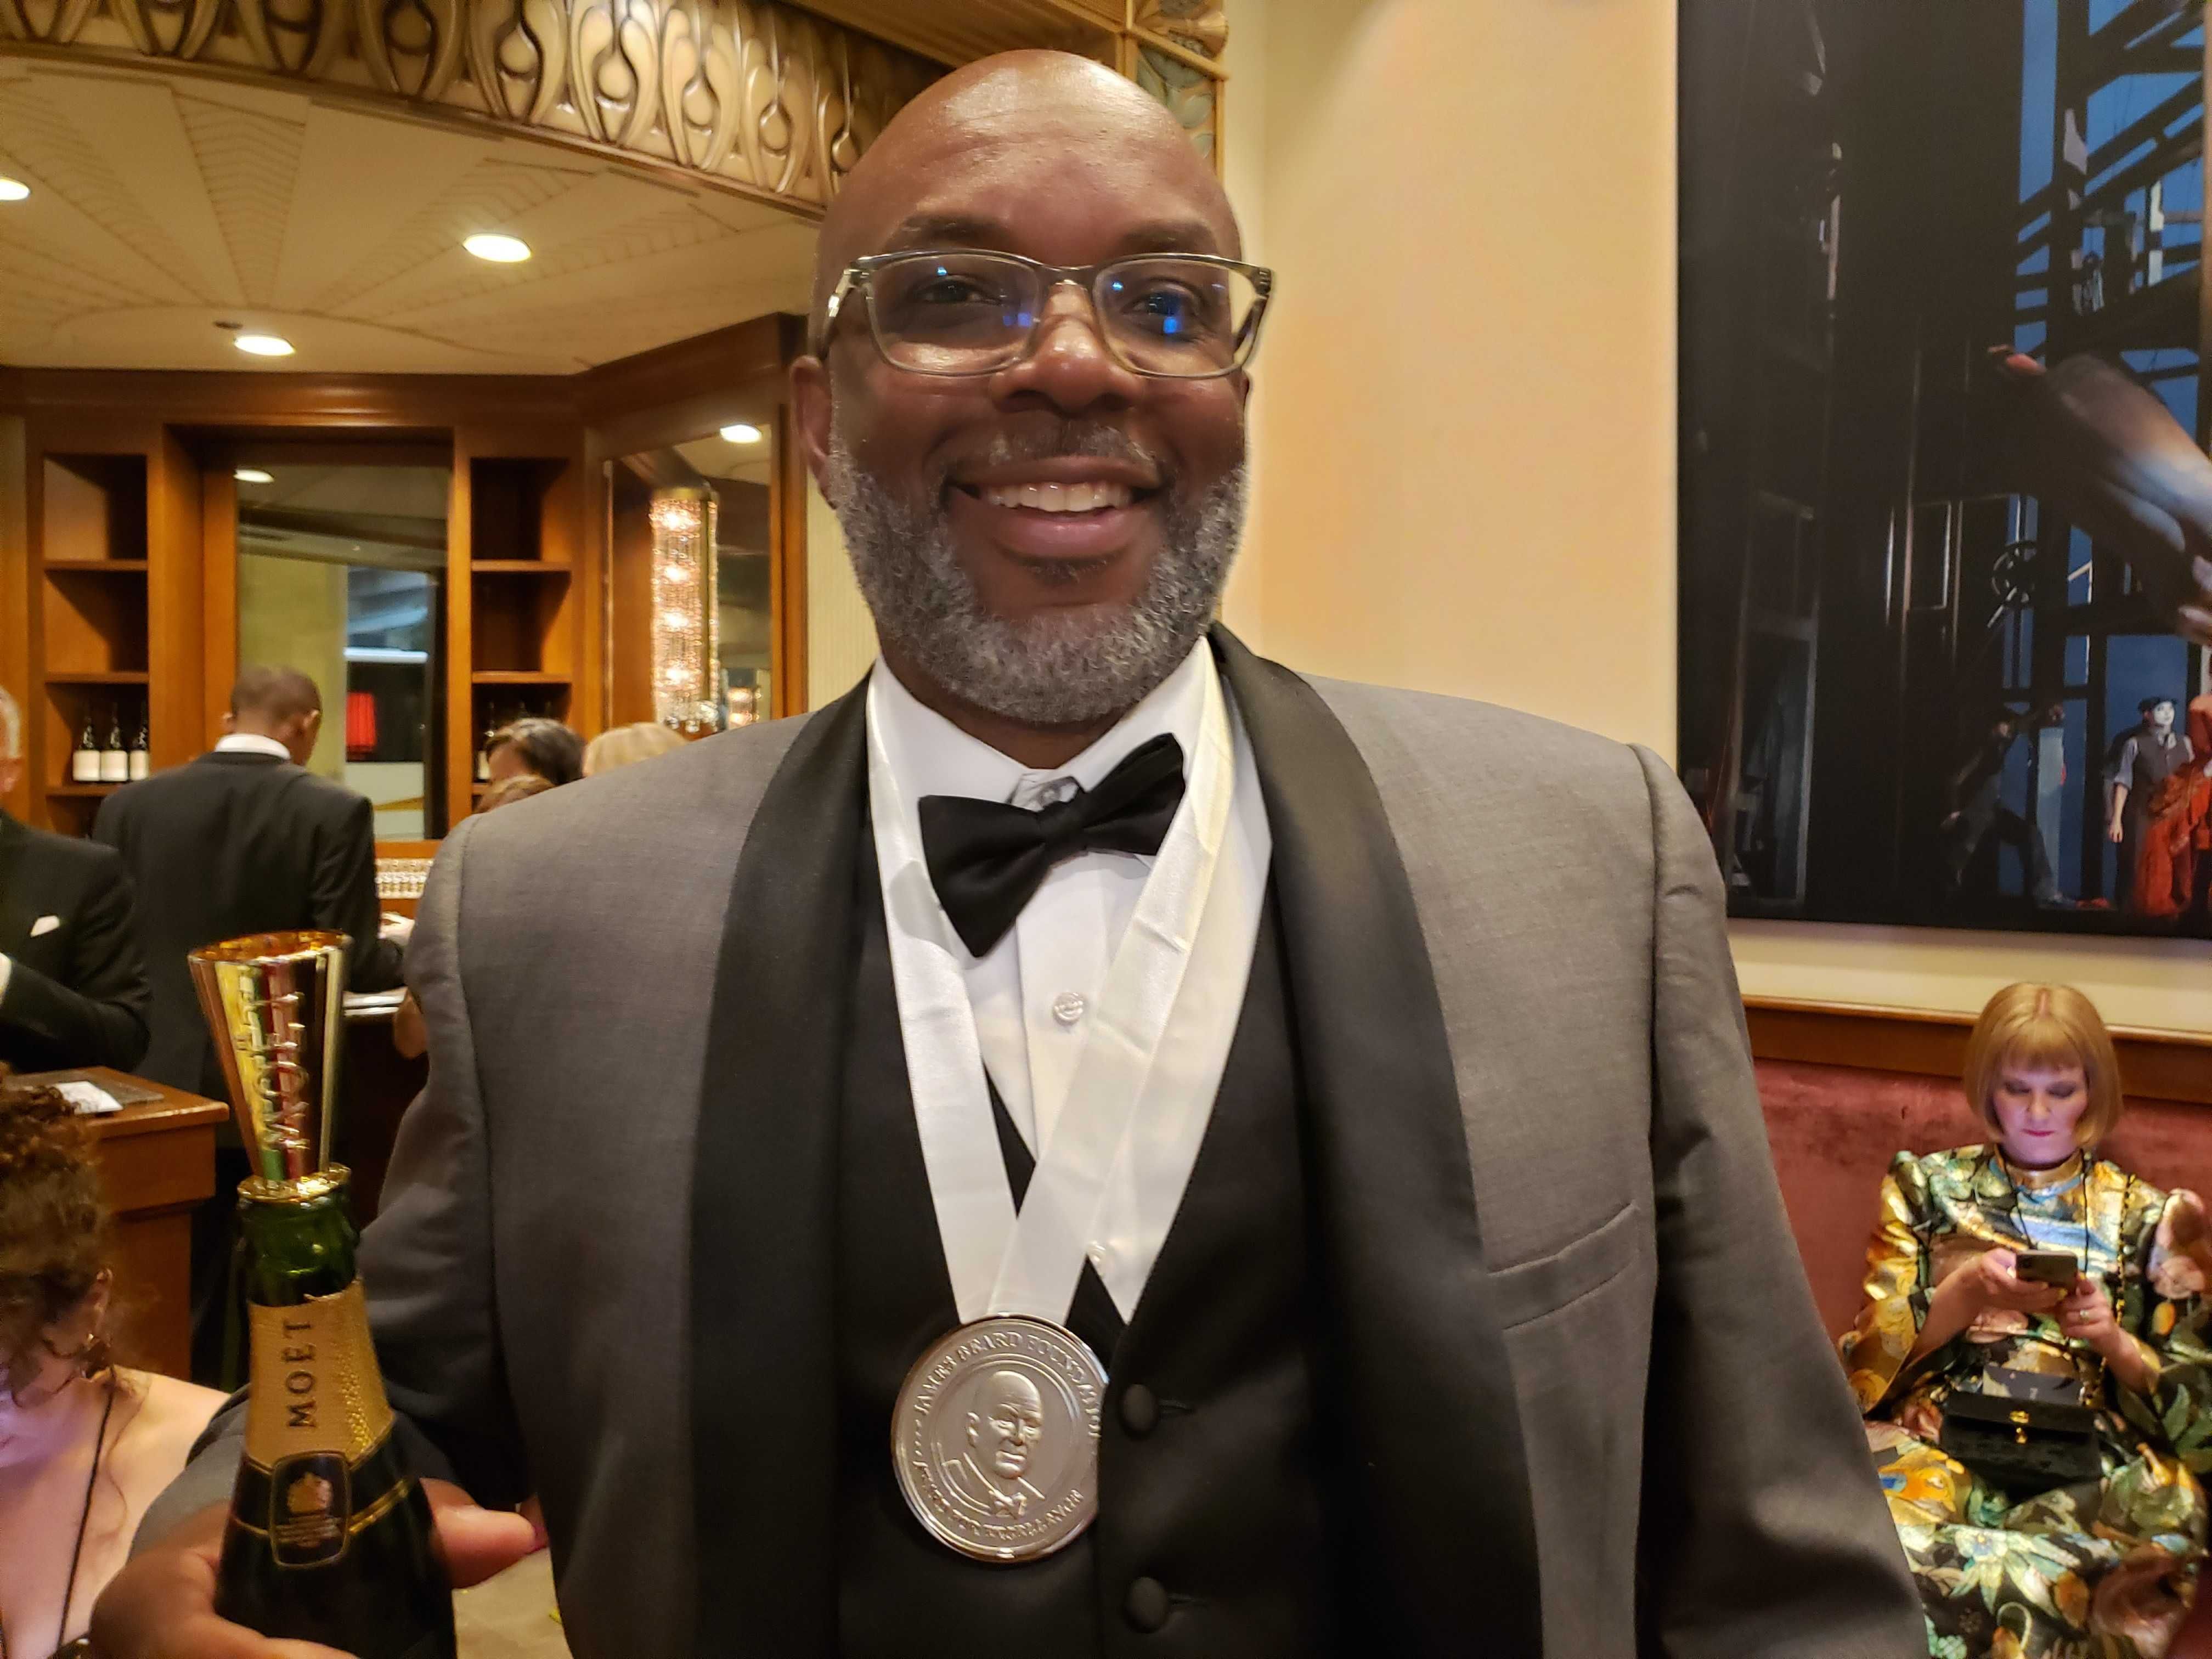 photo of Ricky Moore in a tuxedo after winning a James Beard Award, with the award around his neck